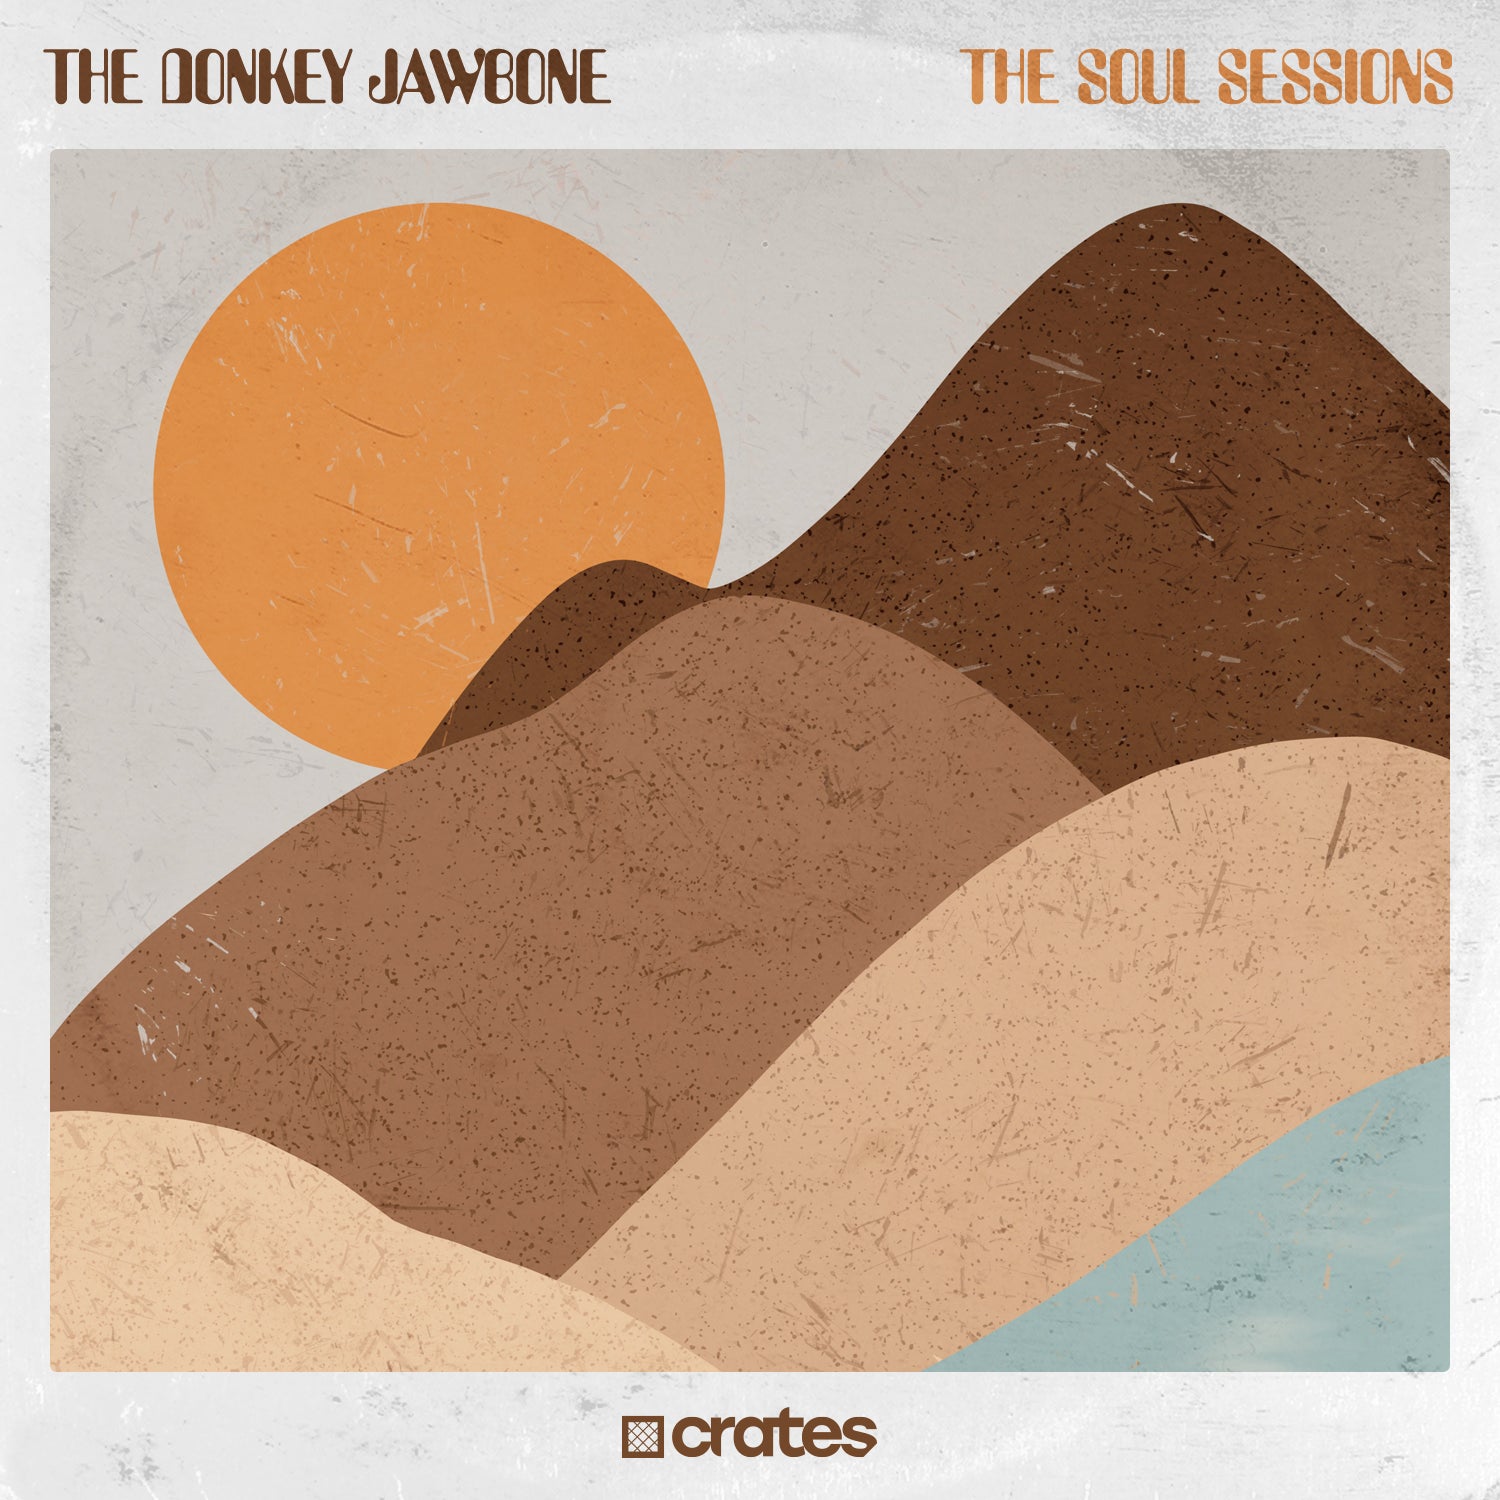 The Donkey Jawbone - The Soul Sessions